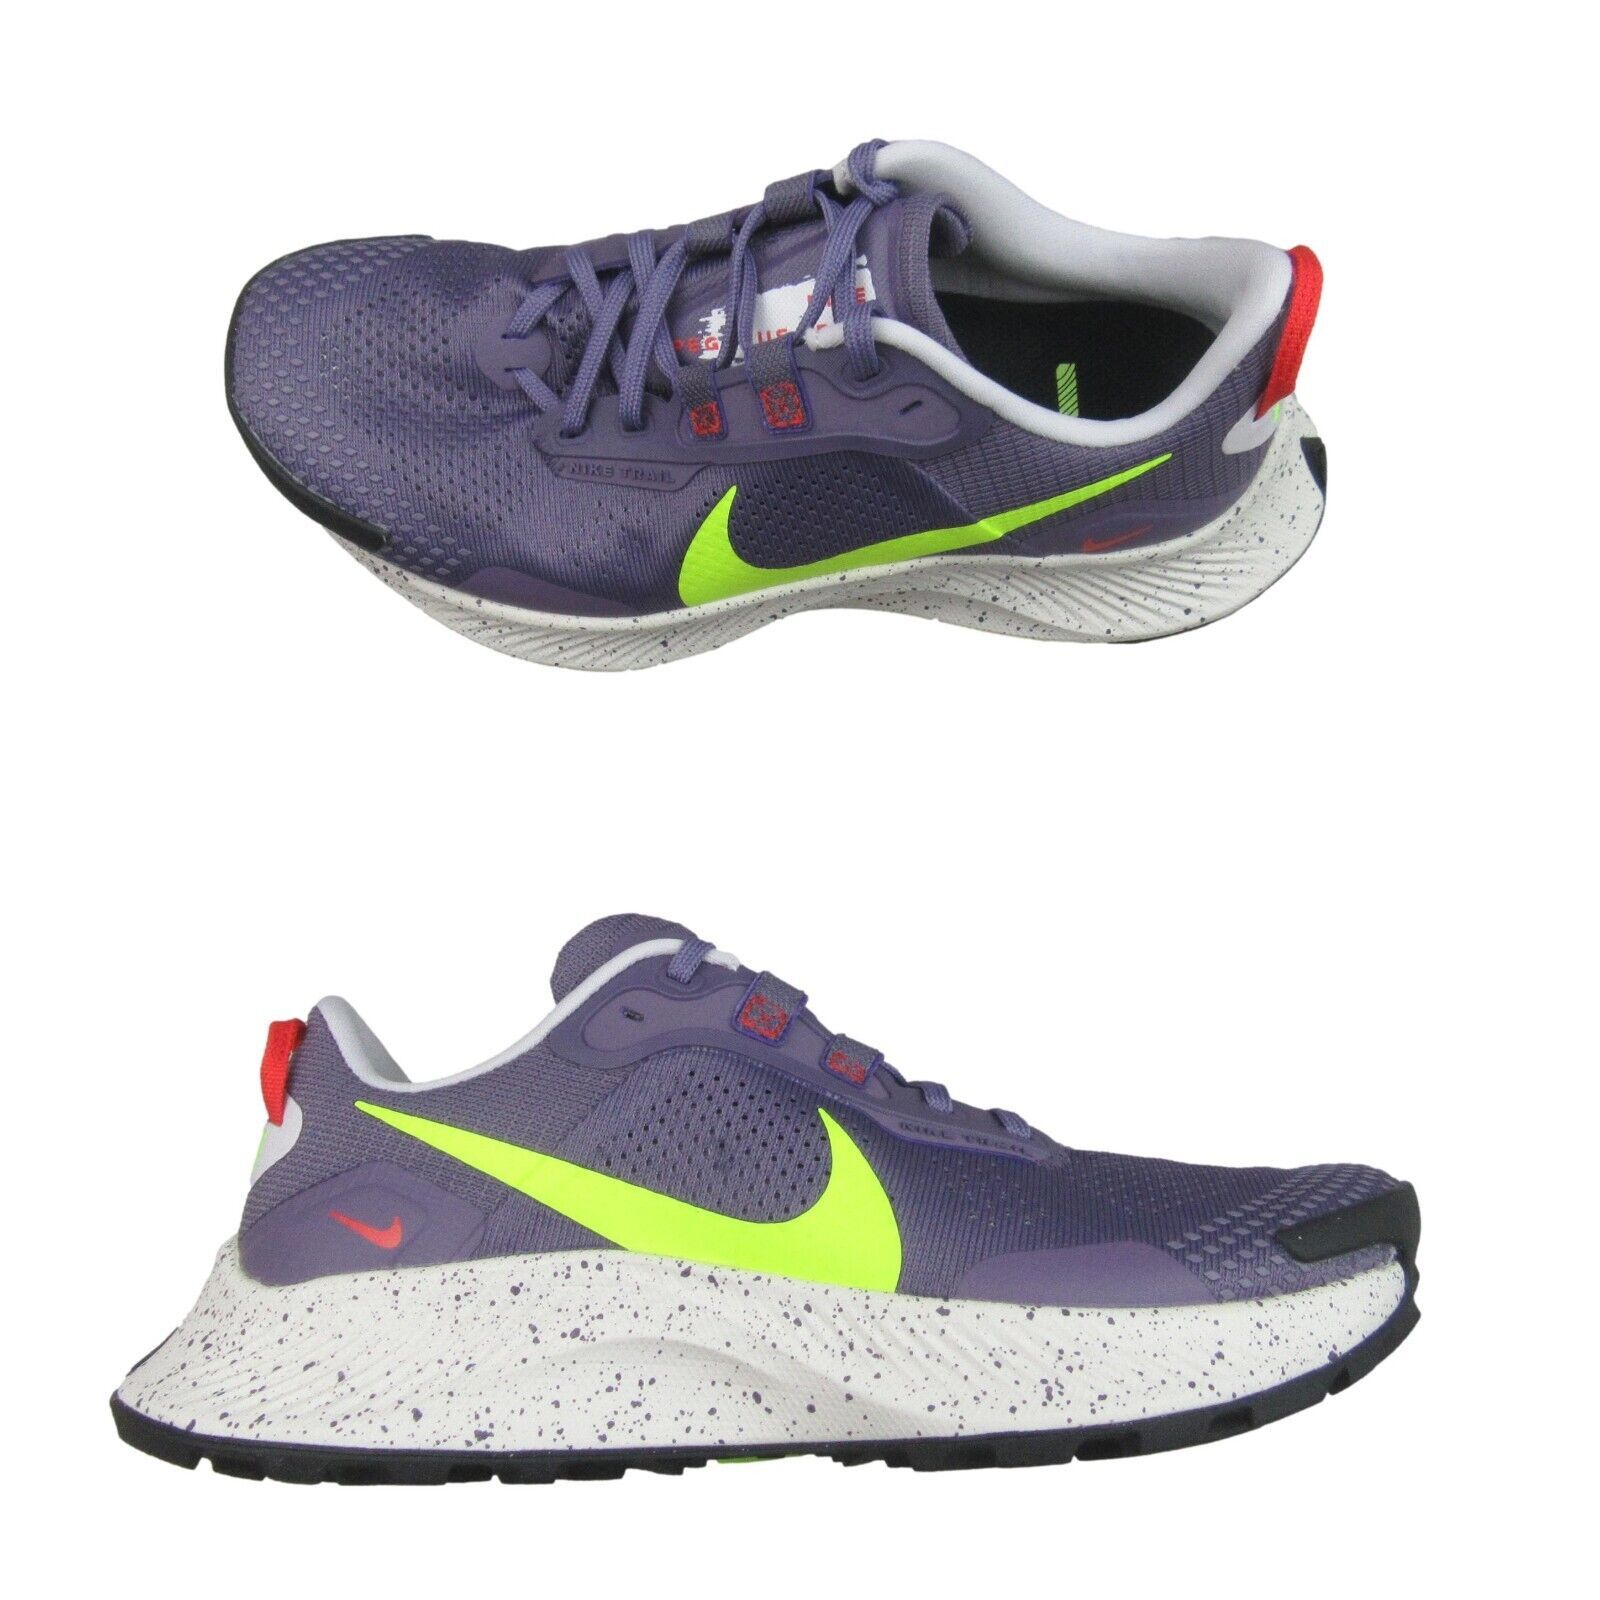 Primary image for Nike Pegasus Trail 3 Hiking Running Shoes Women's Size 7.5 Purple NEW DA8698-500